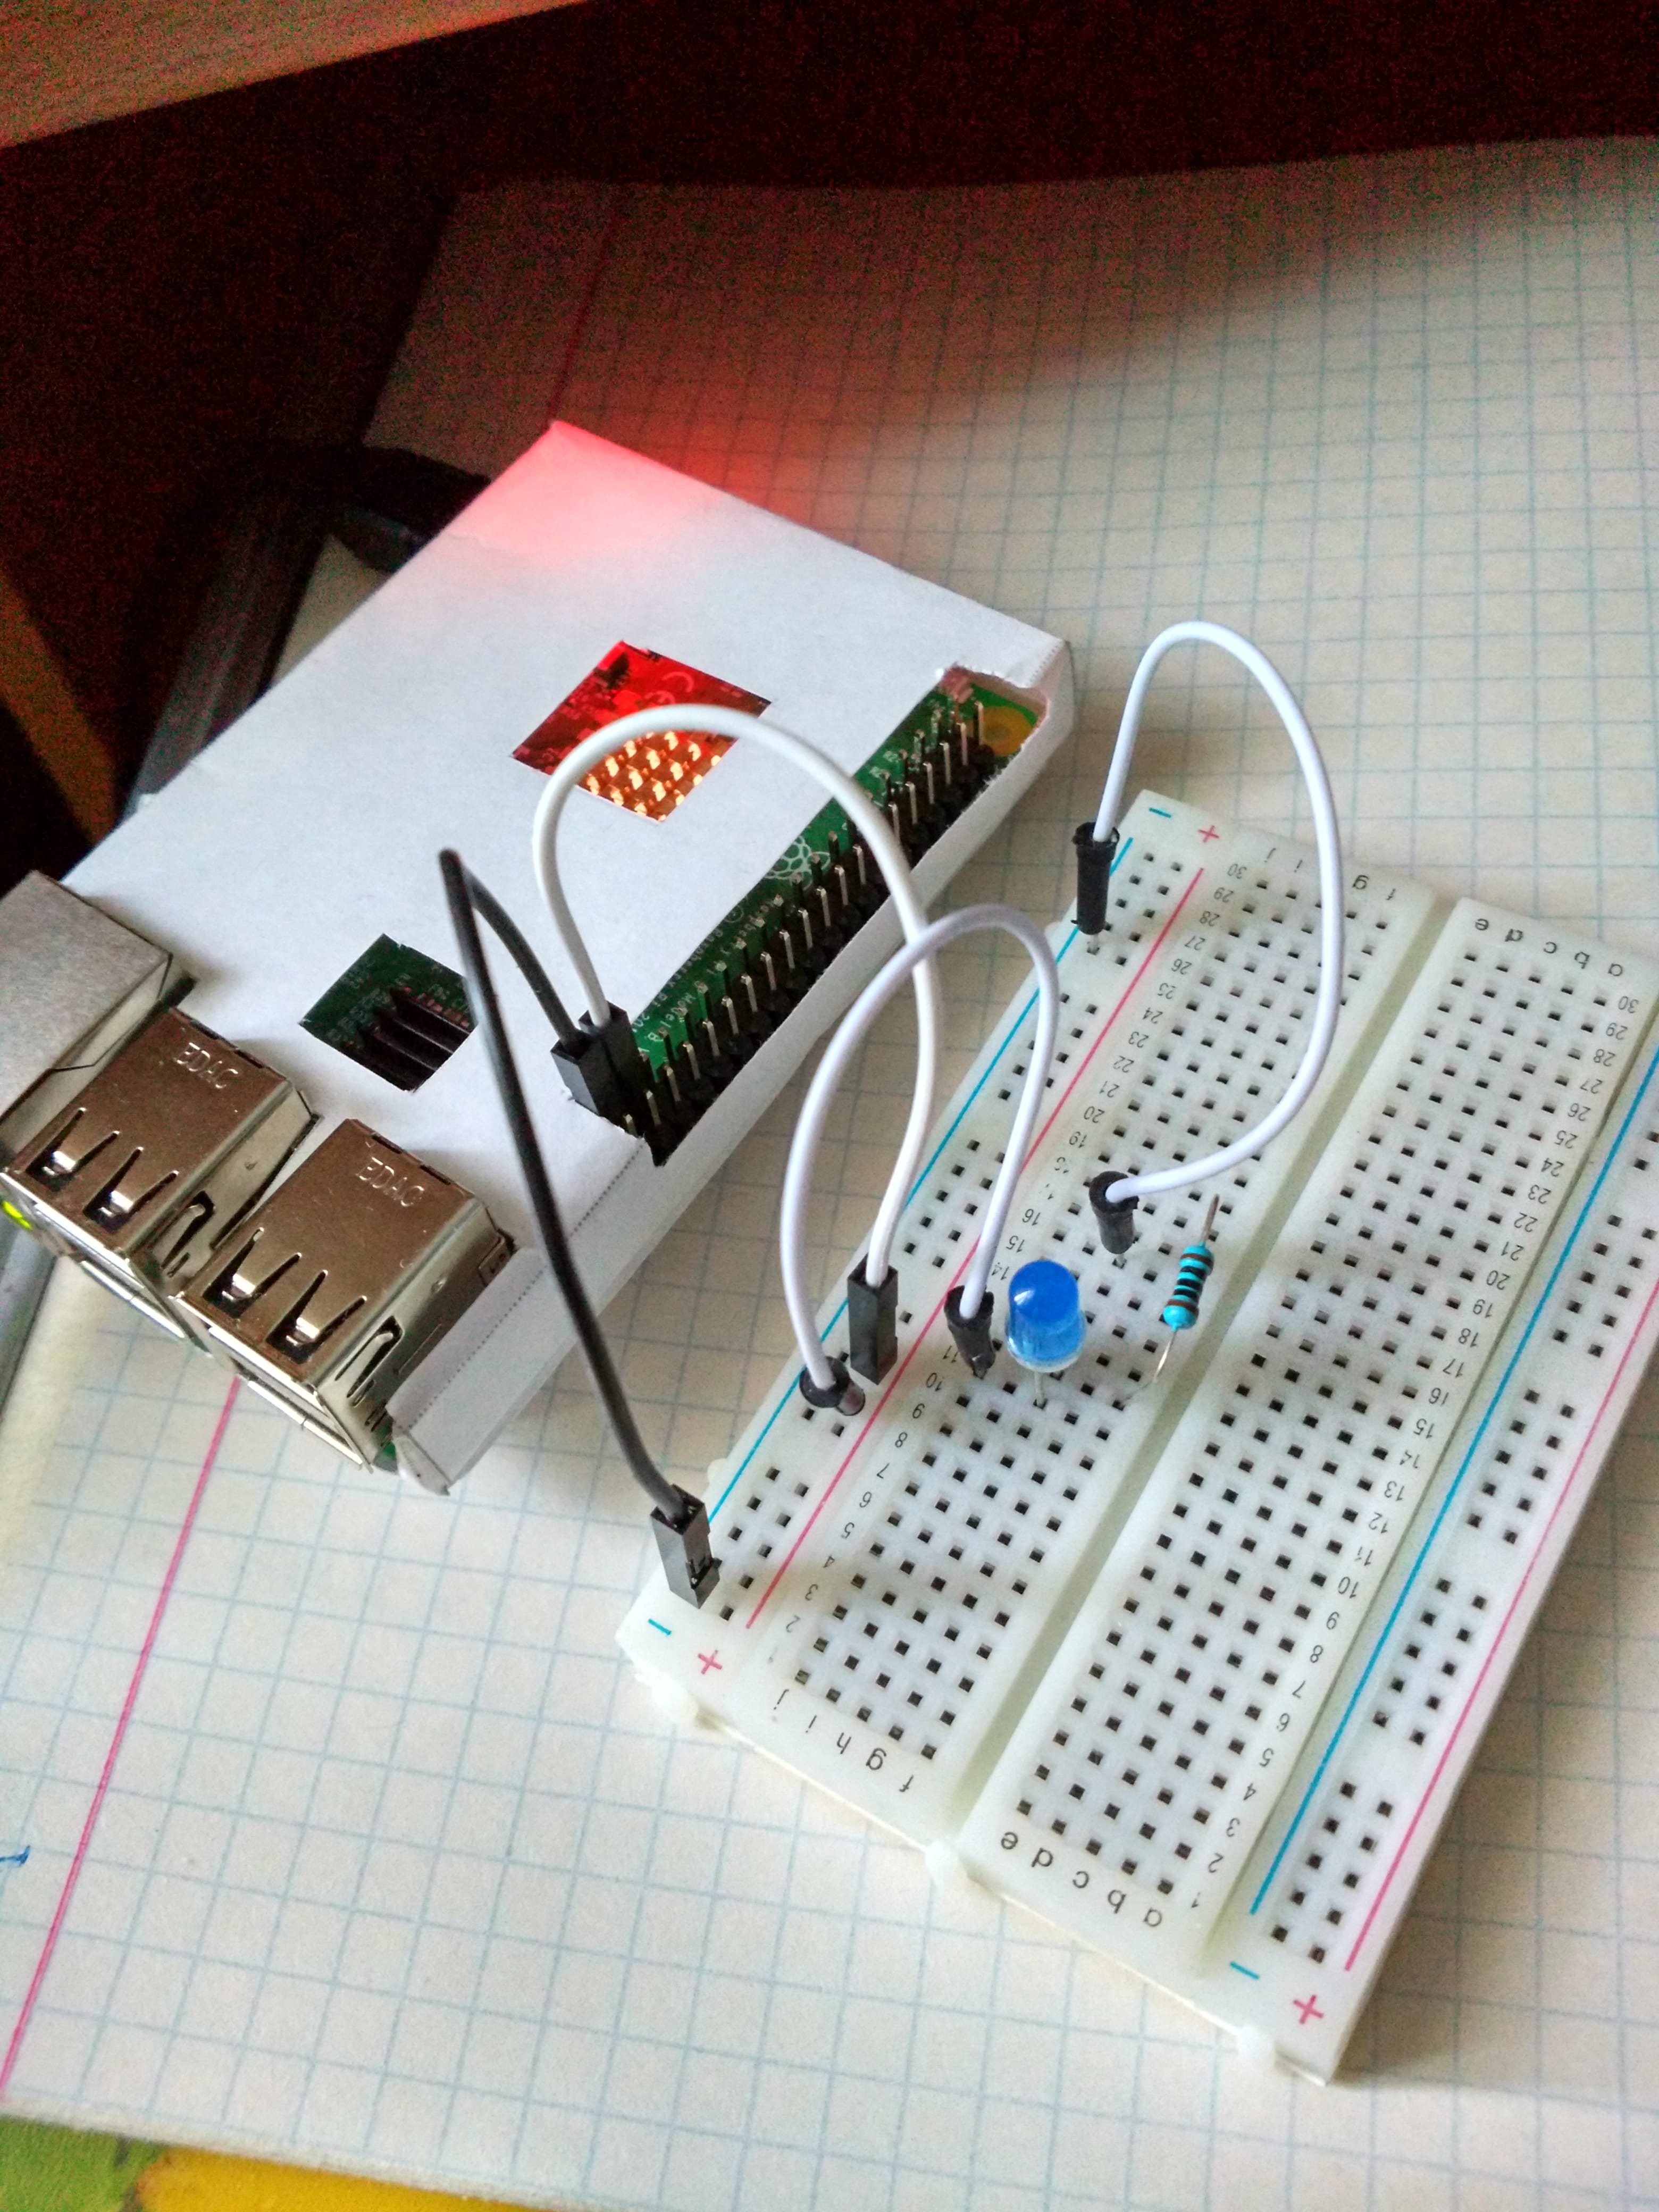 Real Raspberry Pi connection and breadboard